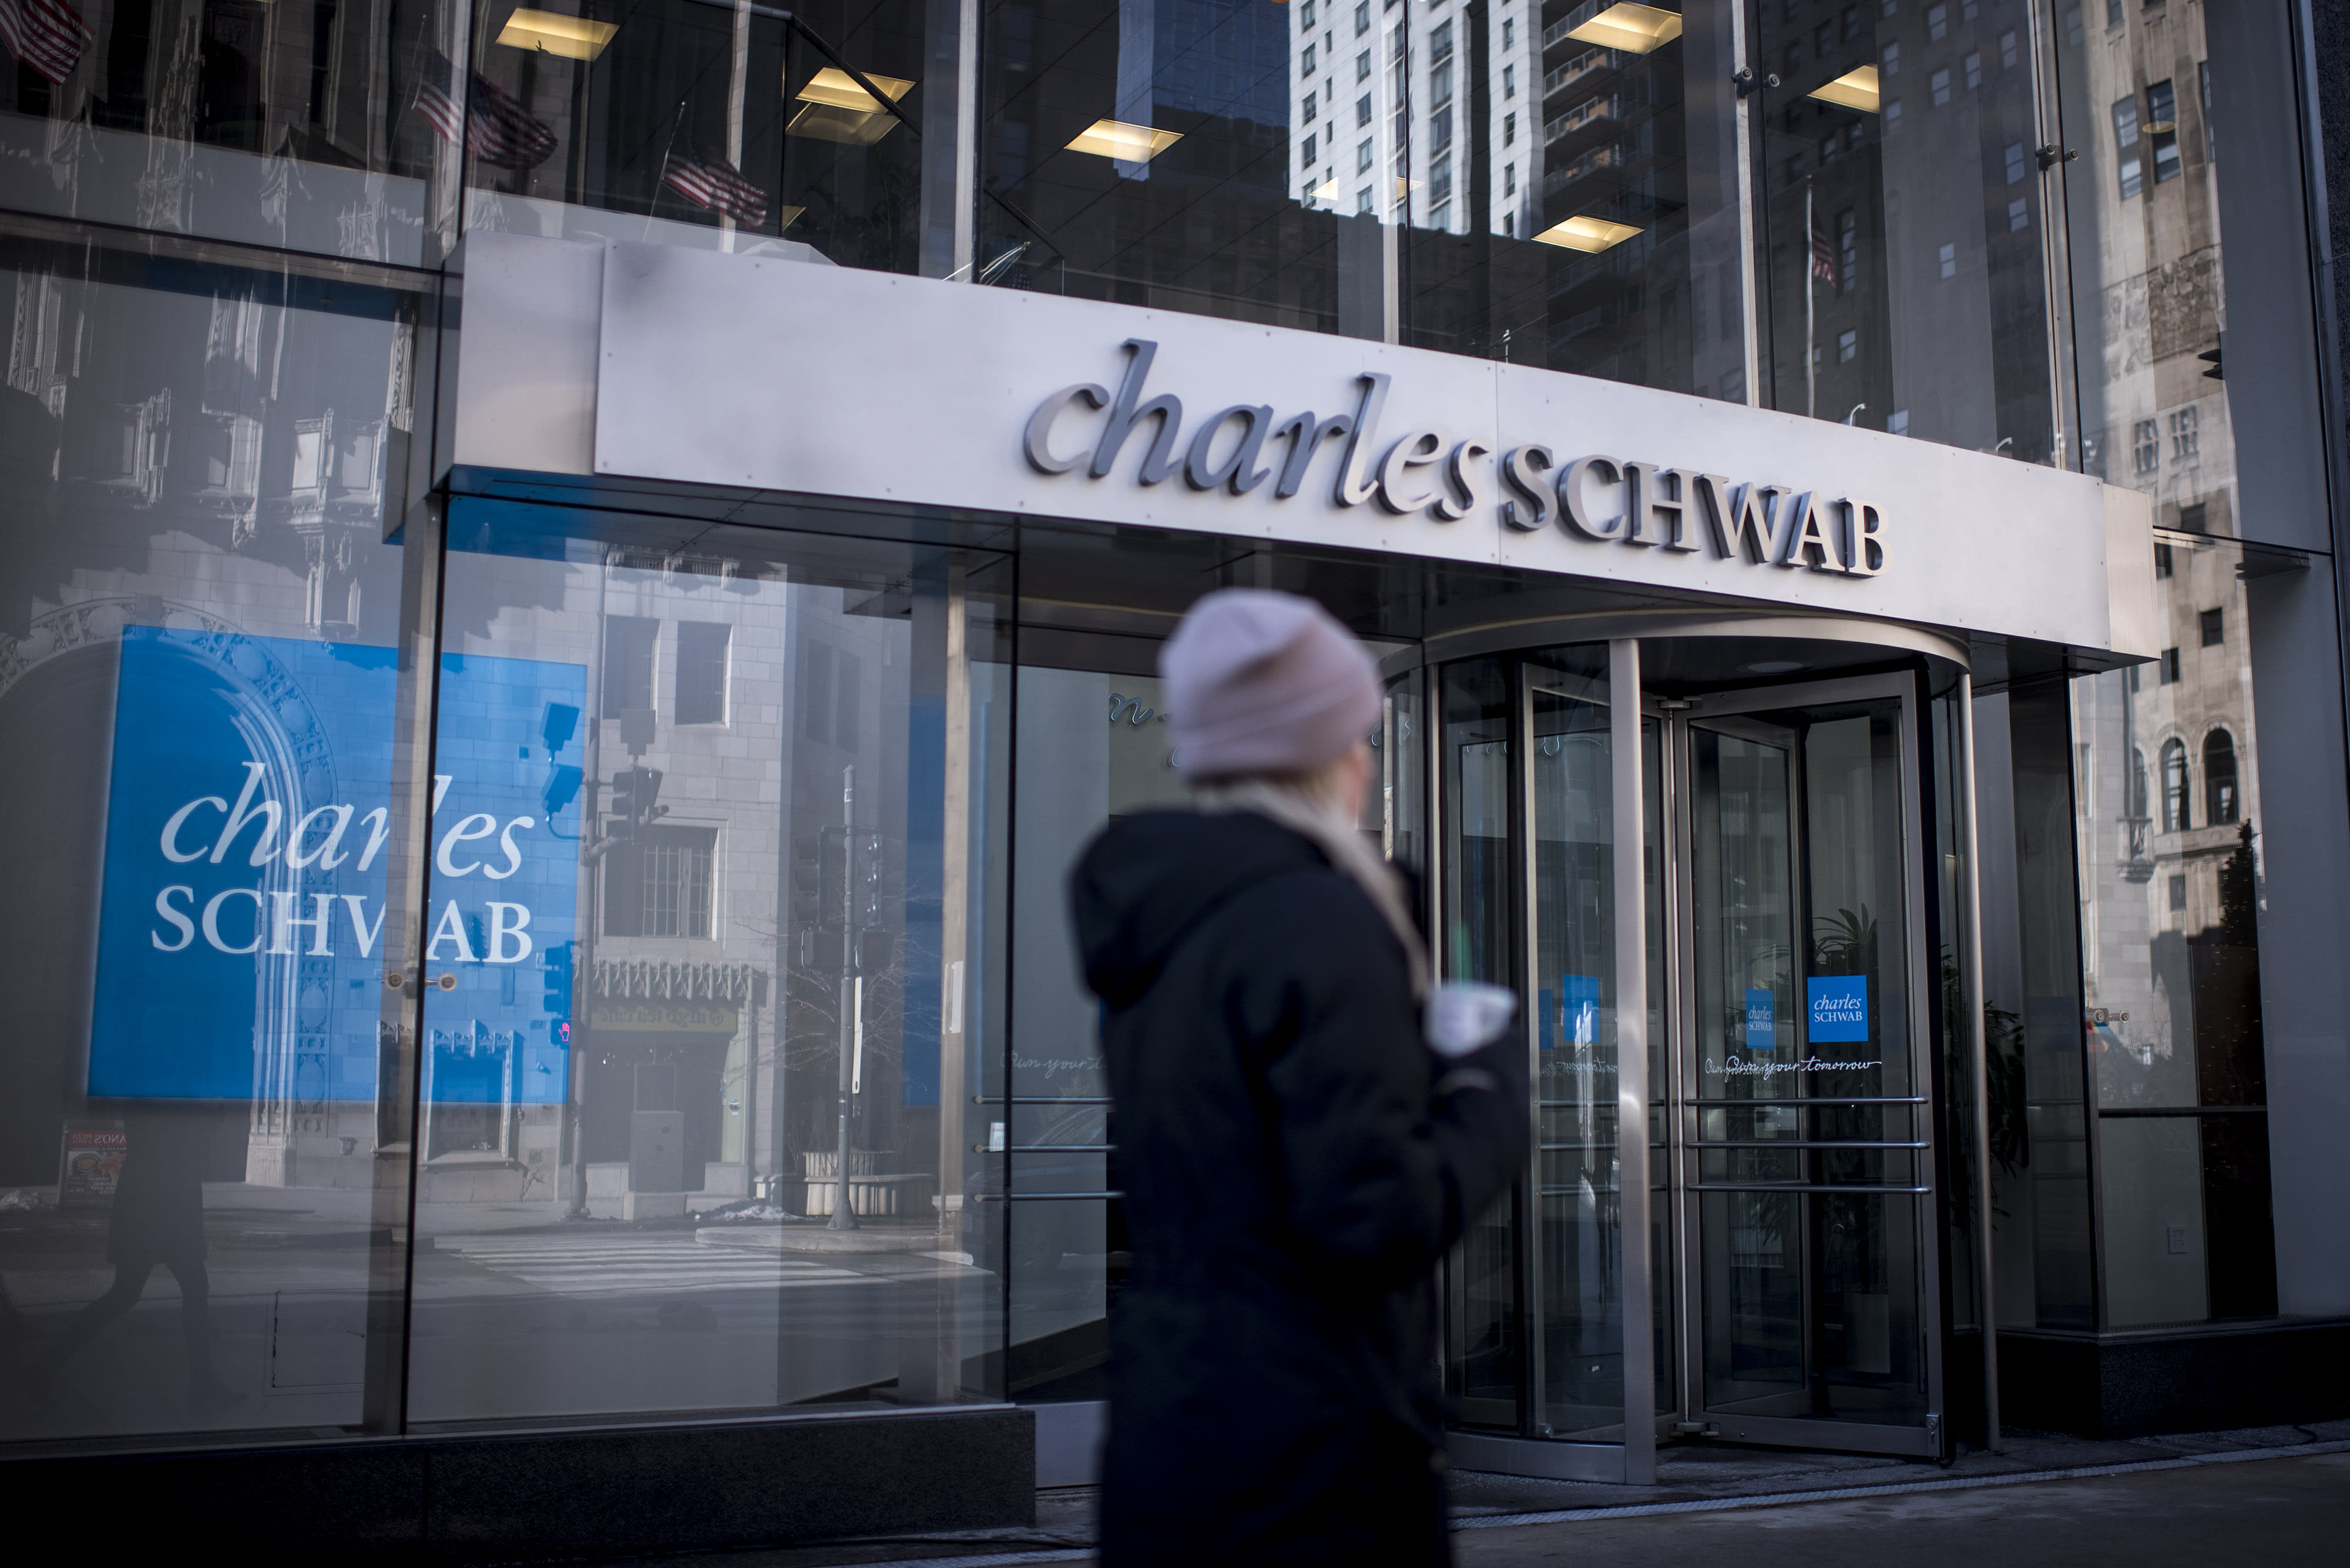 The transfer to free inventory buying and selling led to a giant leap in new accounts for Charles Schwab